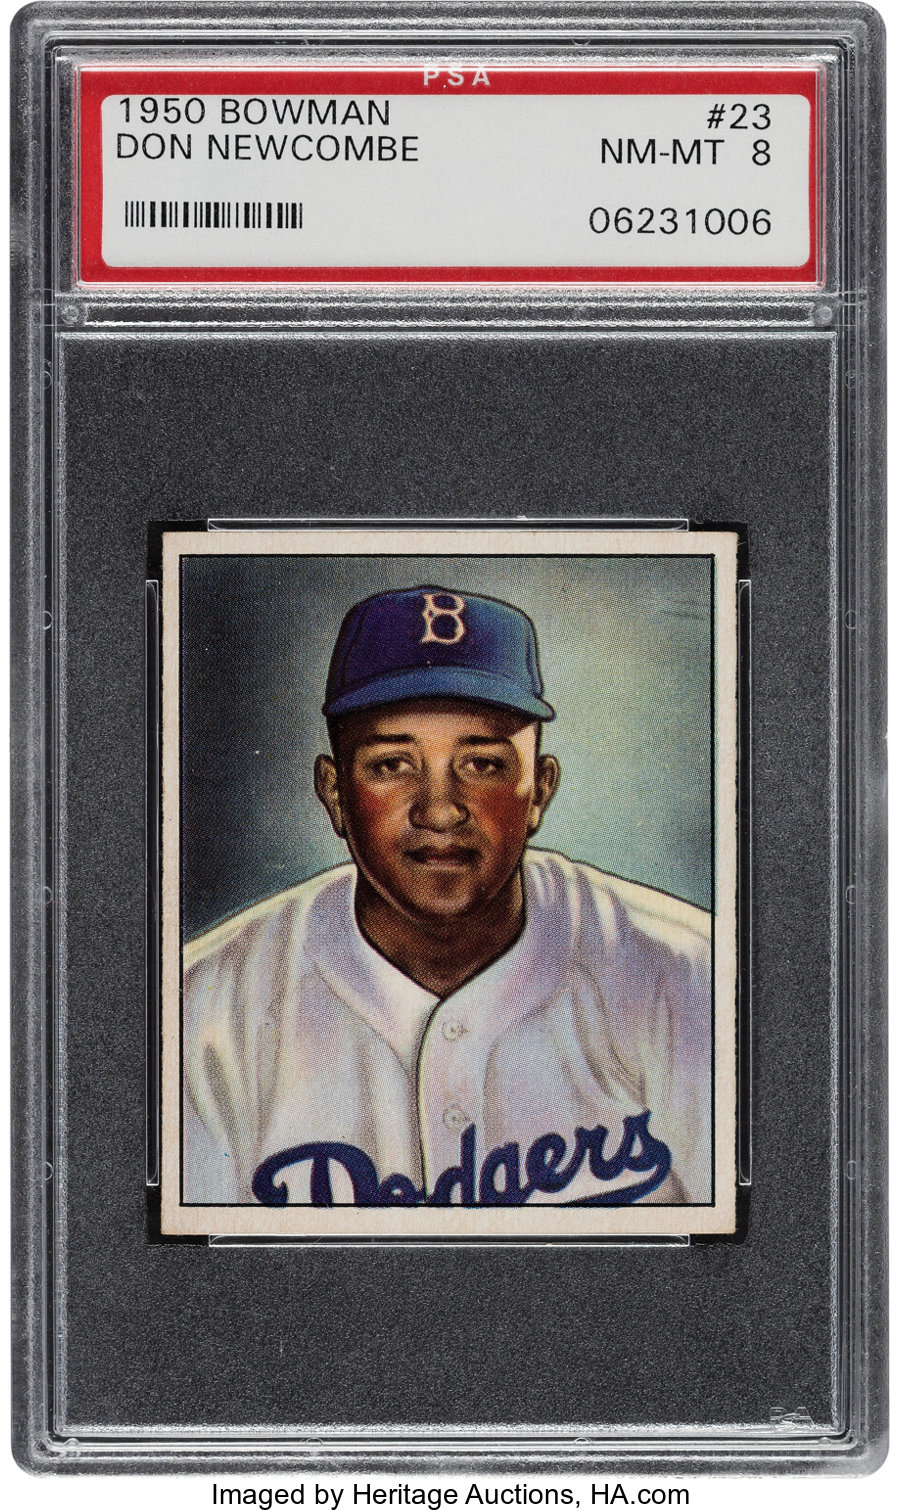 1950 Bowman Don Newcombe #23 PSA NM-MT 8 - Only Five Higher!